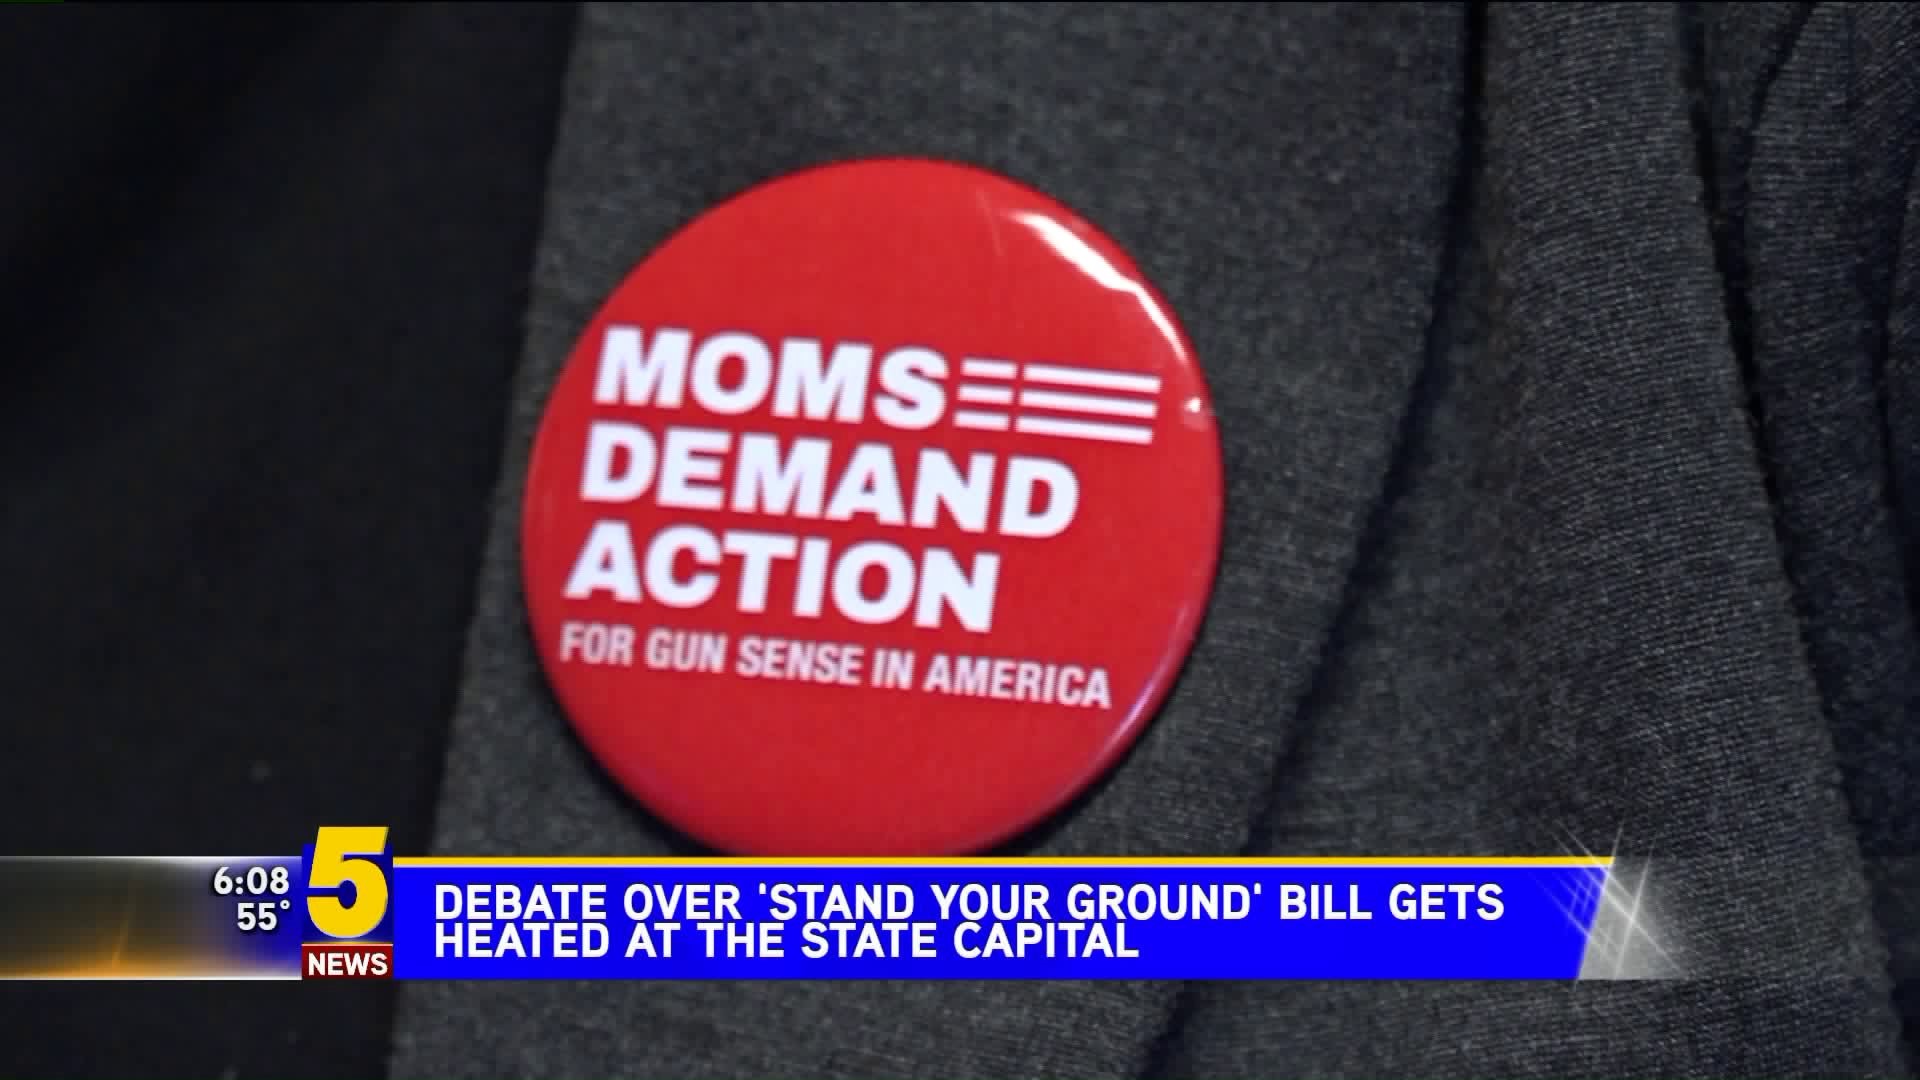 Debate Over Stand Your Ground Bill Gets Heated At State Capital